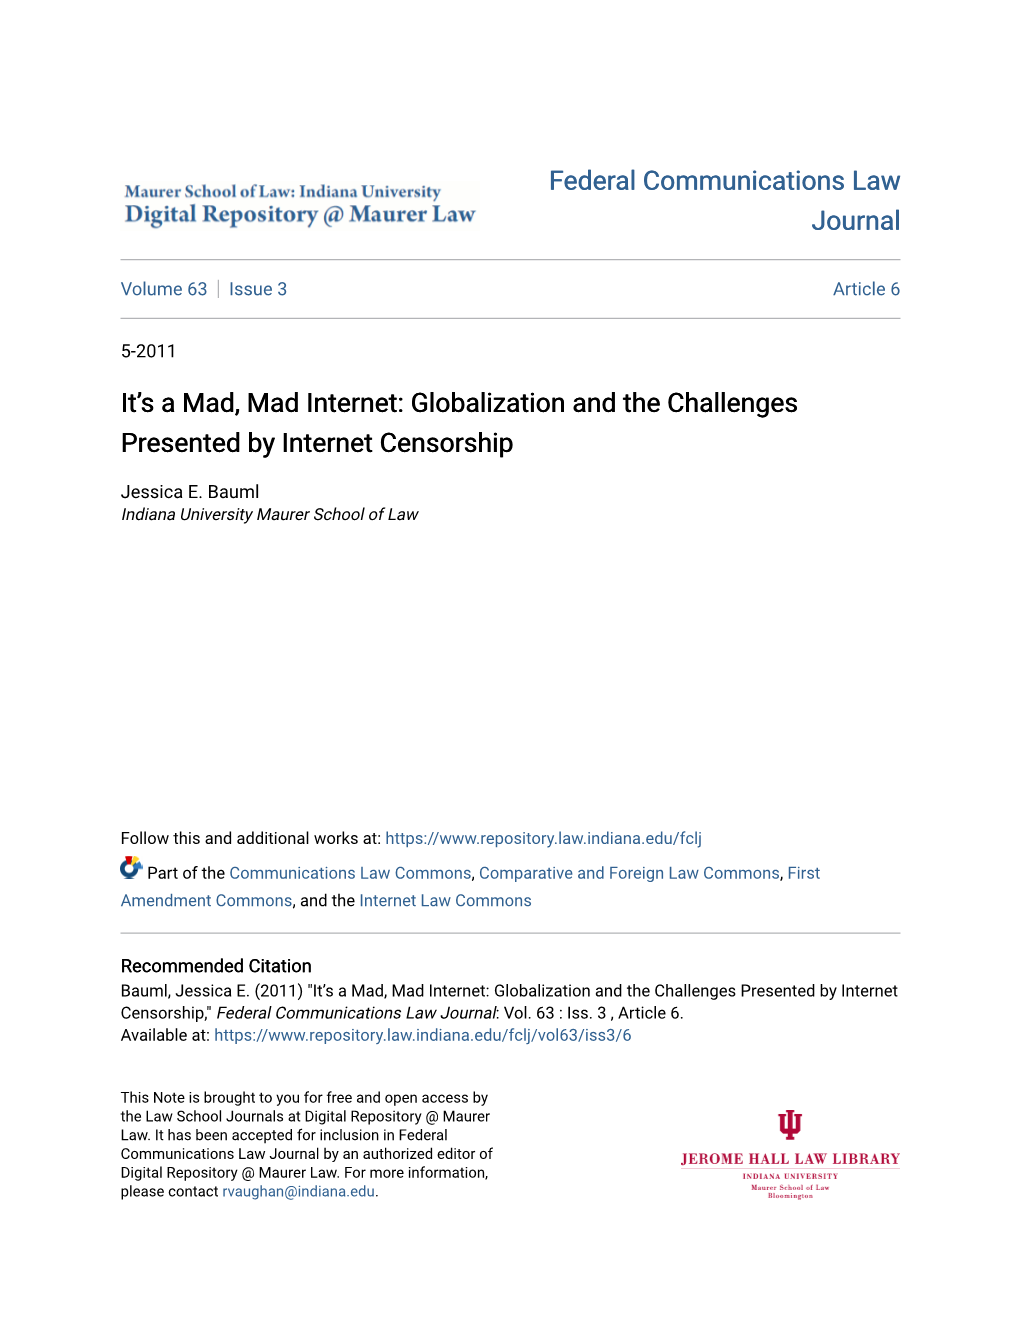 Globalization and the Challenges Presented by Internet Censorship